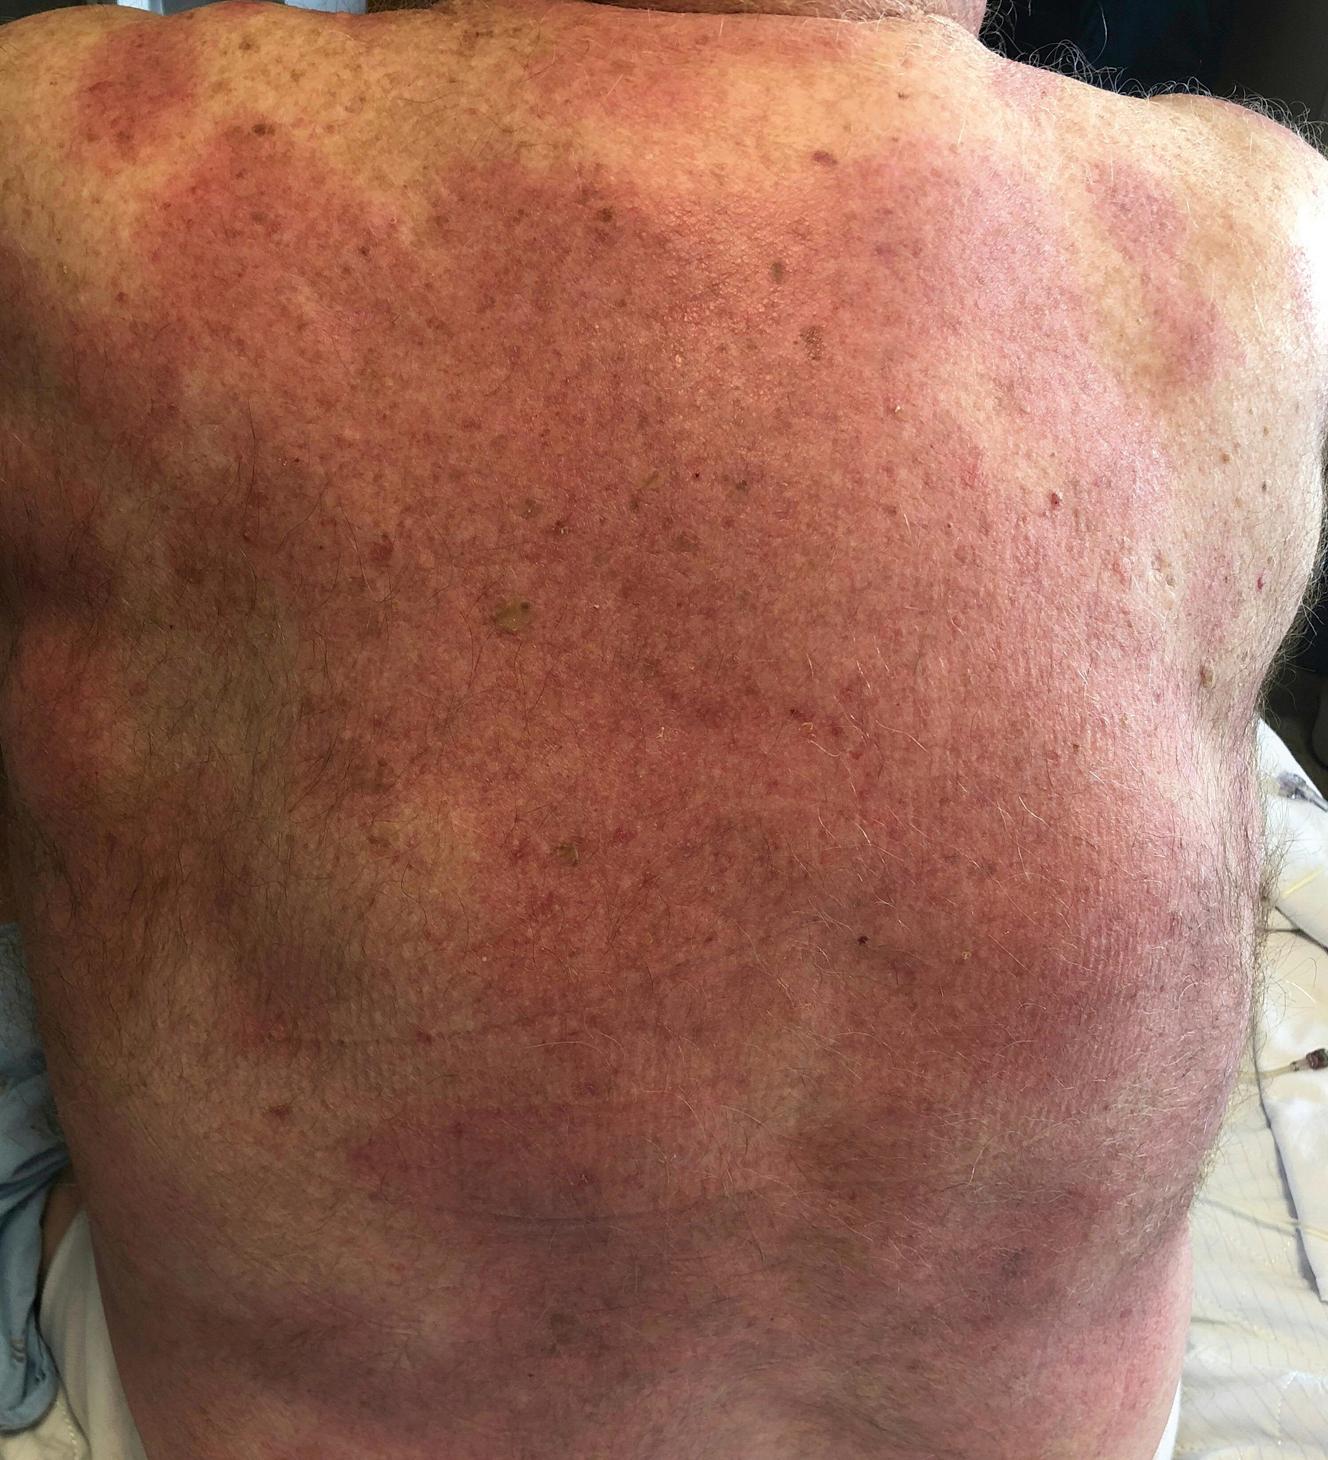 Fig. 15.2, Large area of erythema due to the confluence of multiple erythema migrans lesions.